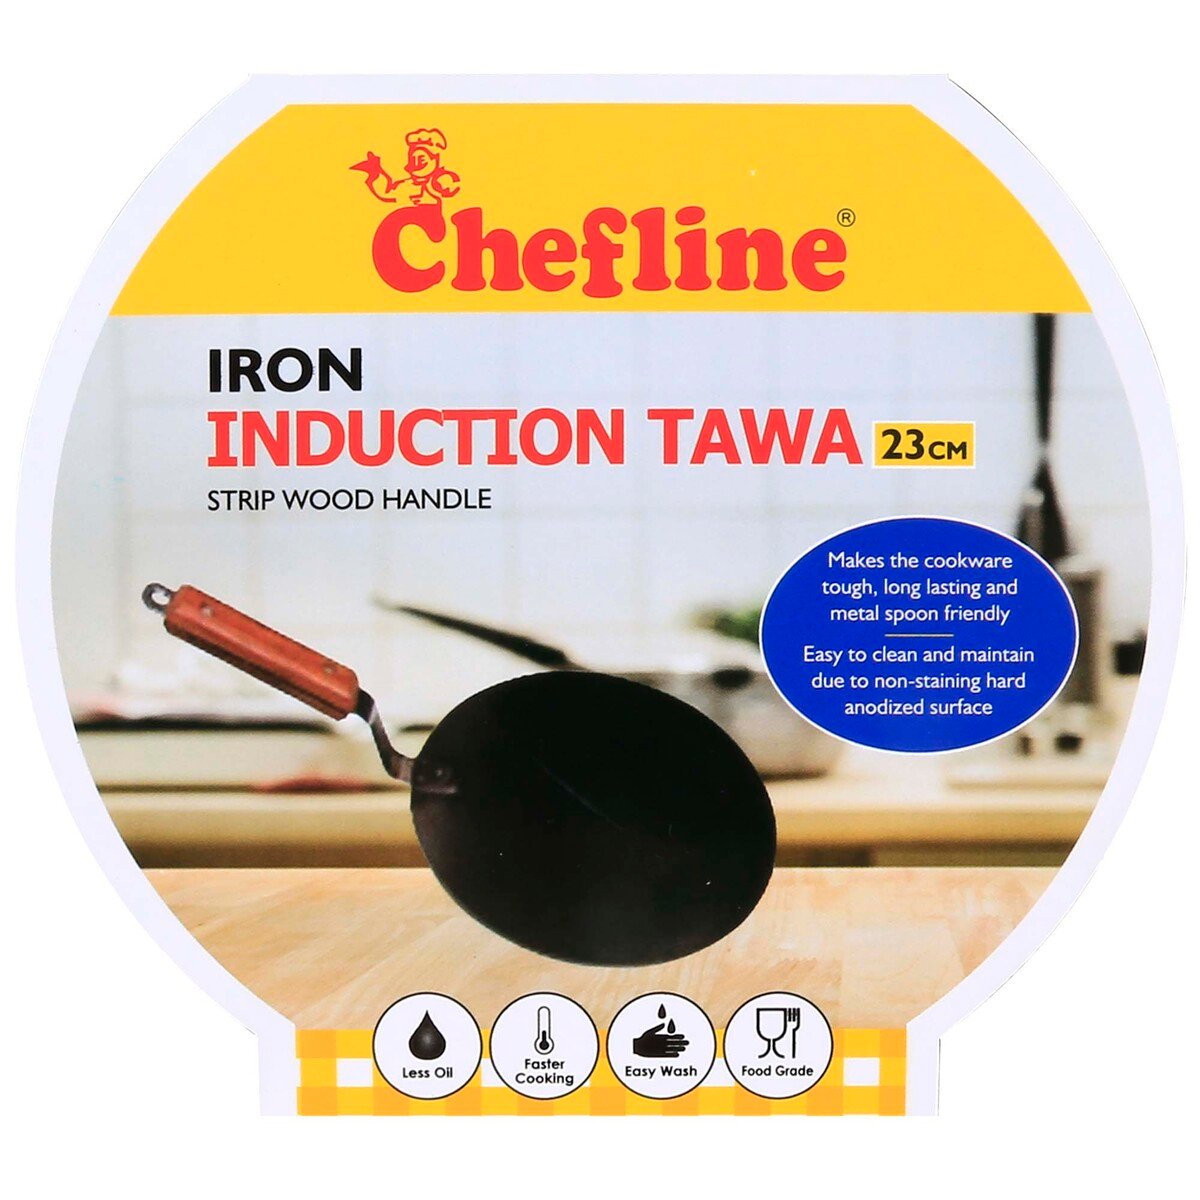 Chefline Iron Induction Tawa with Strip Wooden Handle, 23 cm, Black, IND